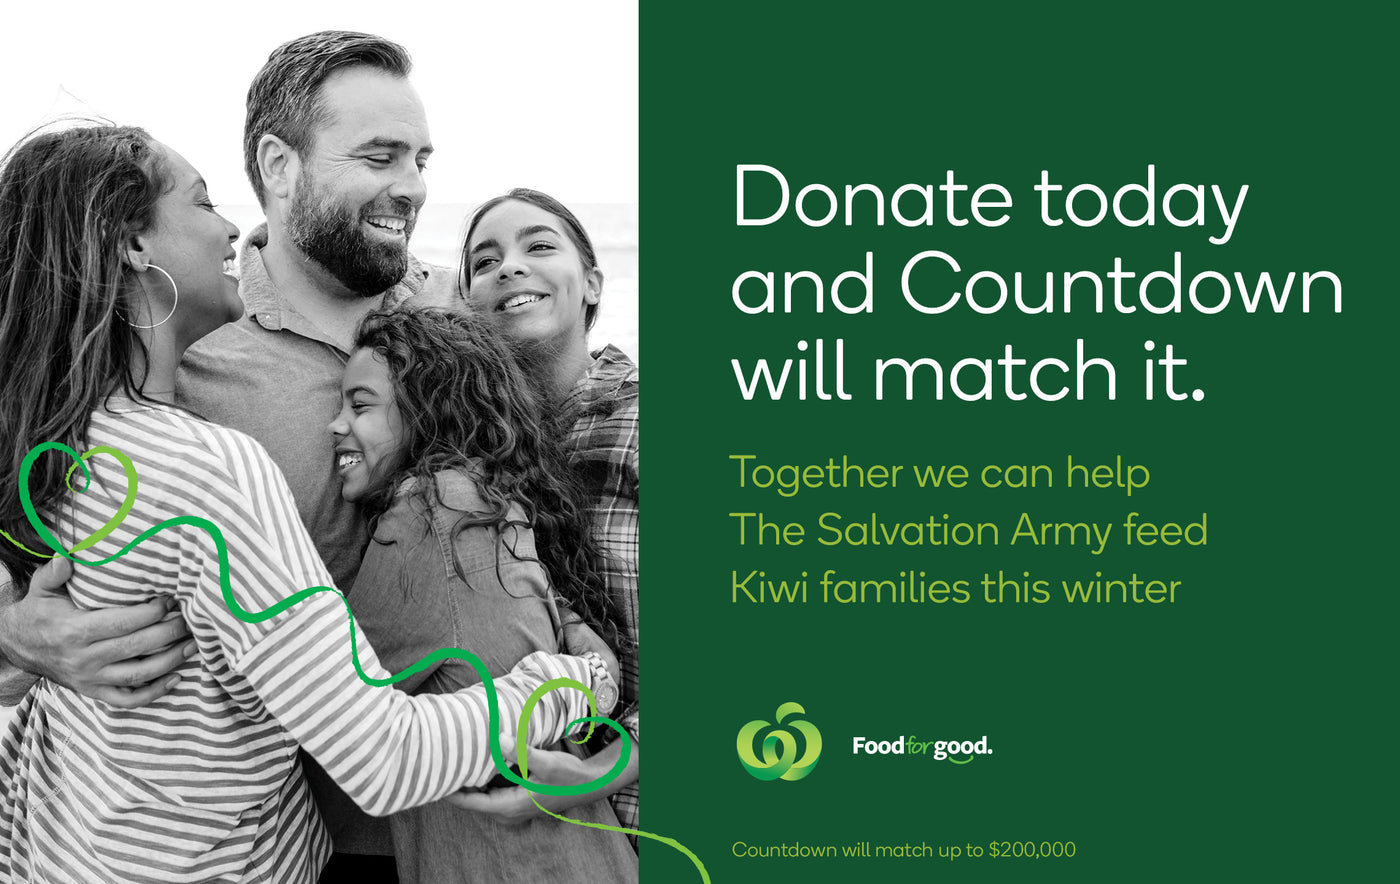 Together we can help Kiwi families this winter.